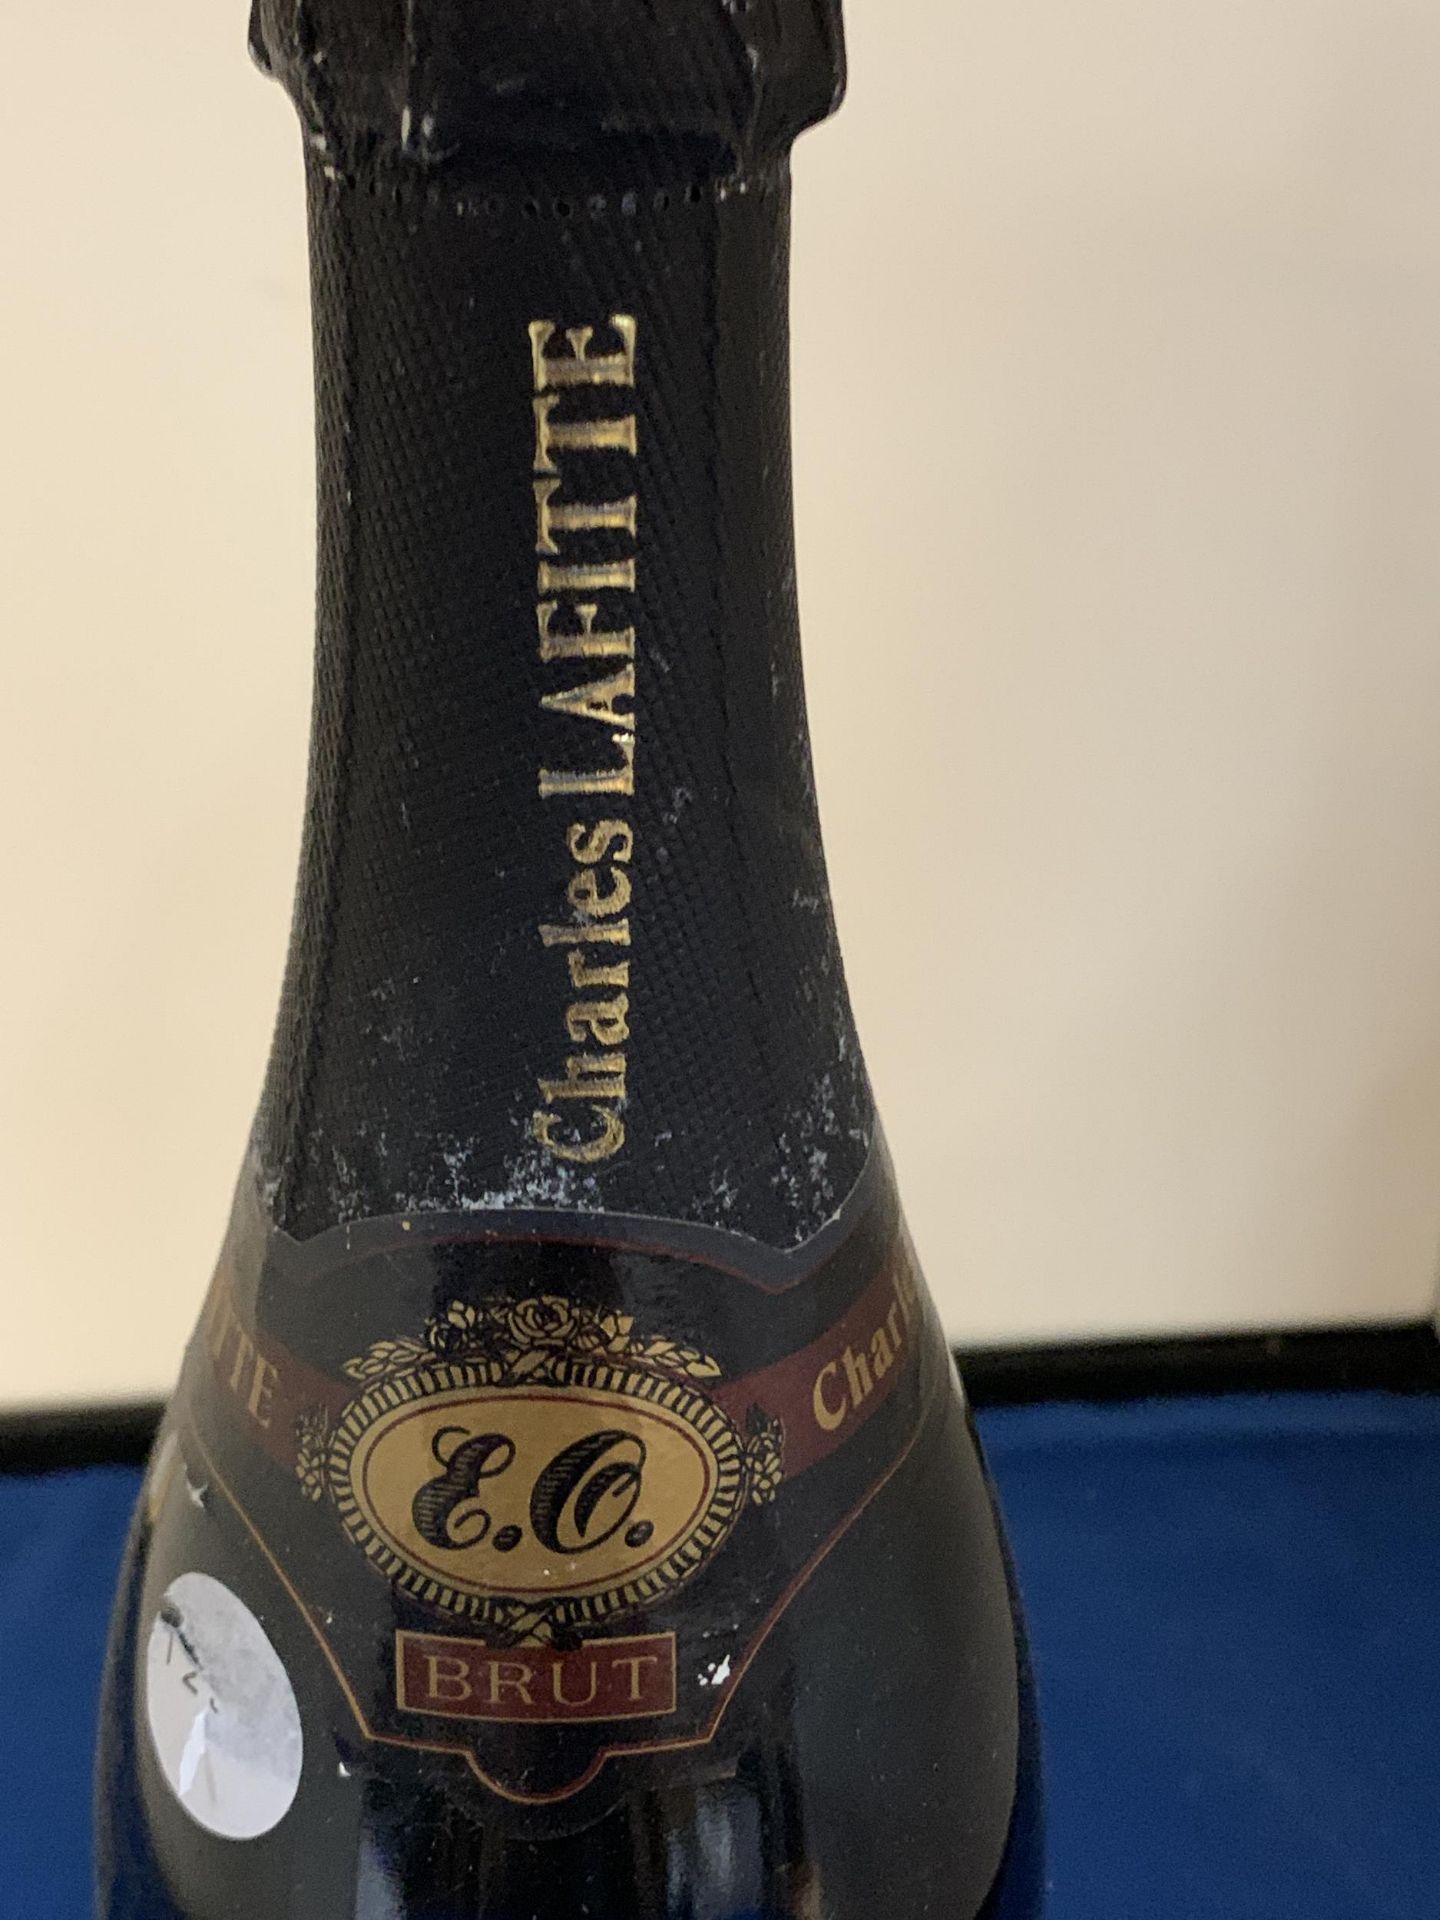 A BOTTLE OF CHARLES LAFITTE TETE DE CUVEE CHAMPAGNE - Image 3 of 4